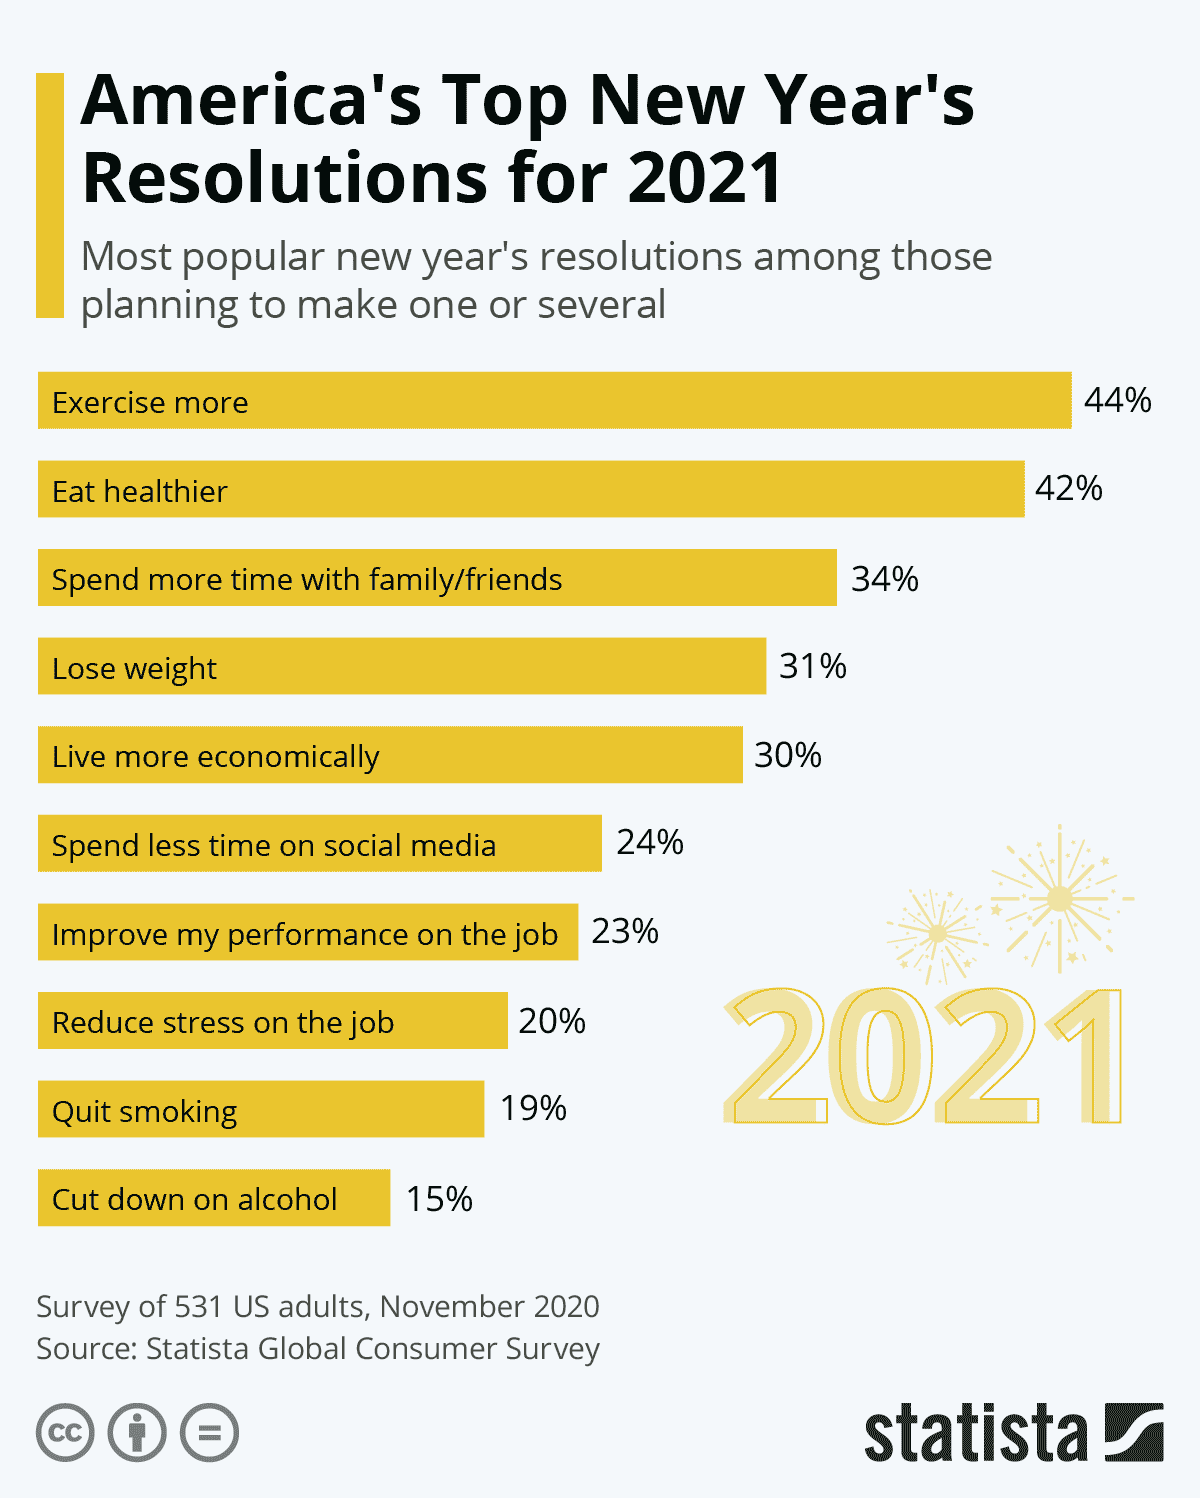 chart of top new year resolutions in 2021.